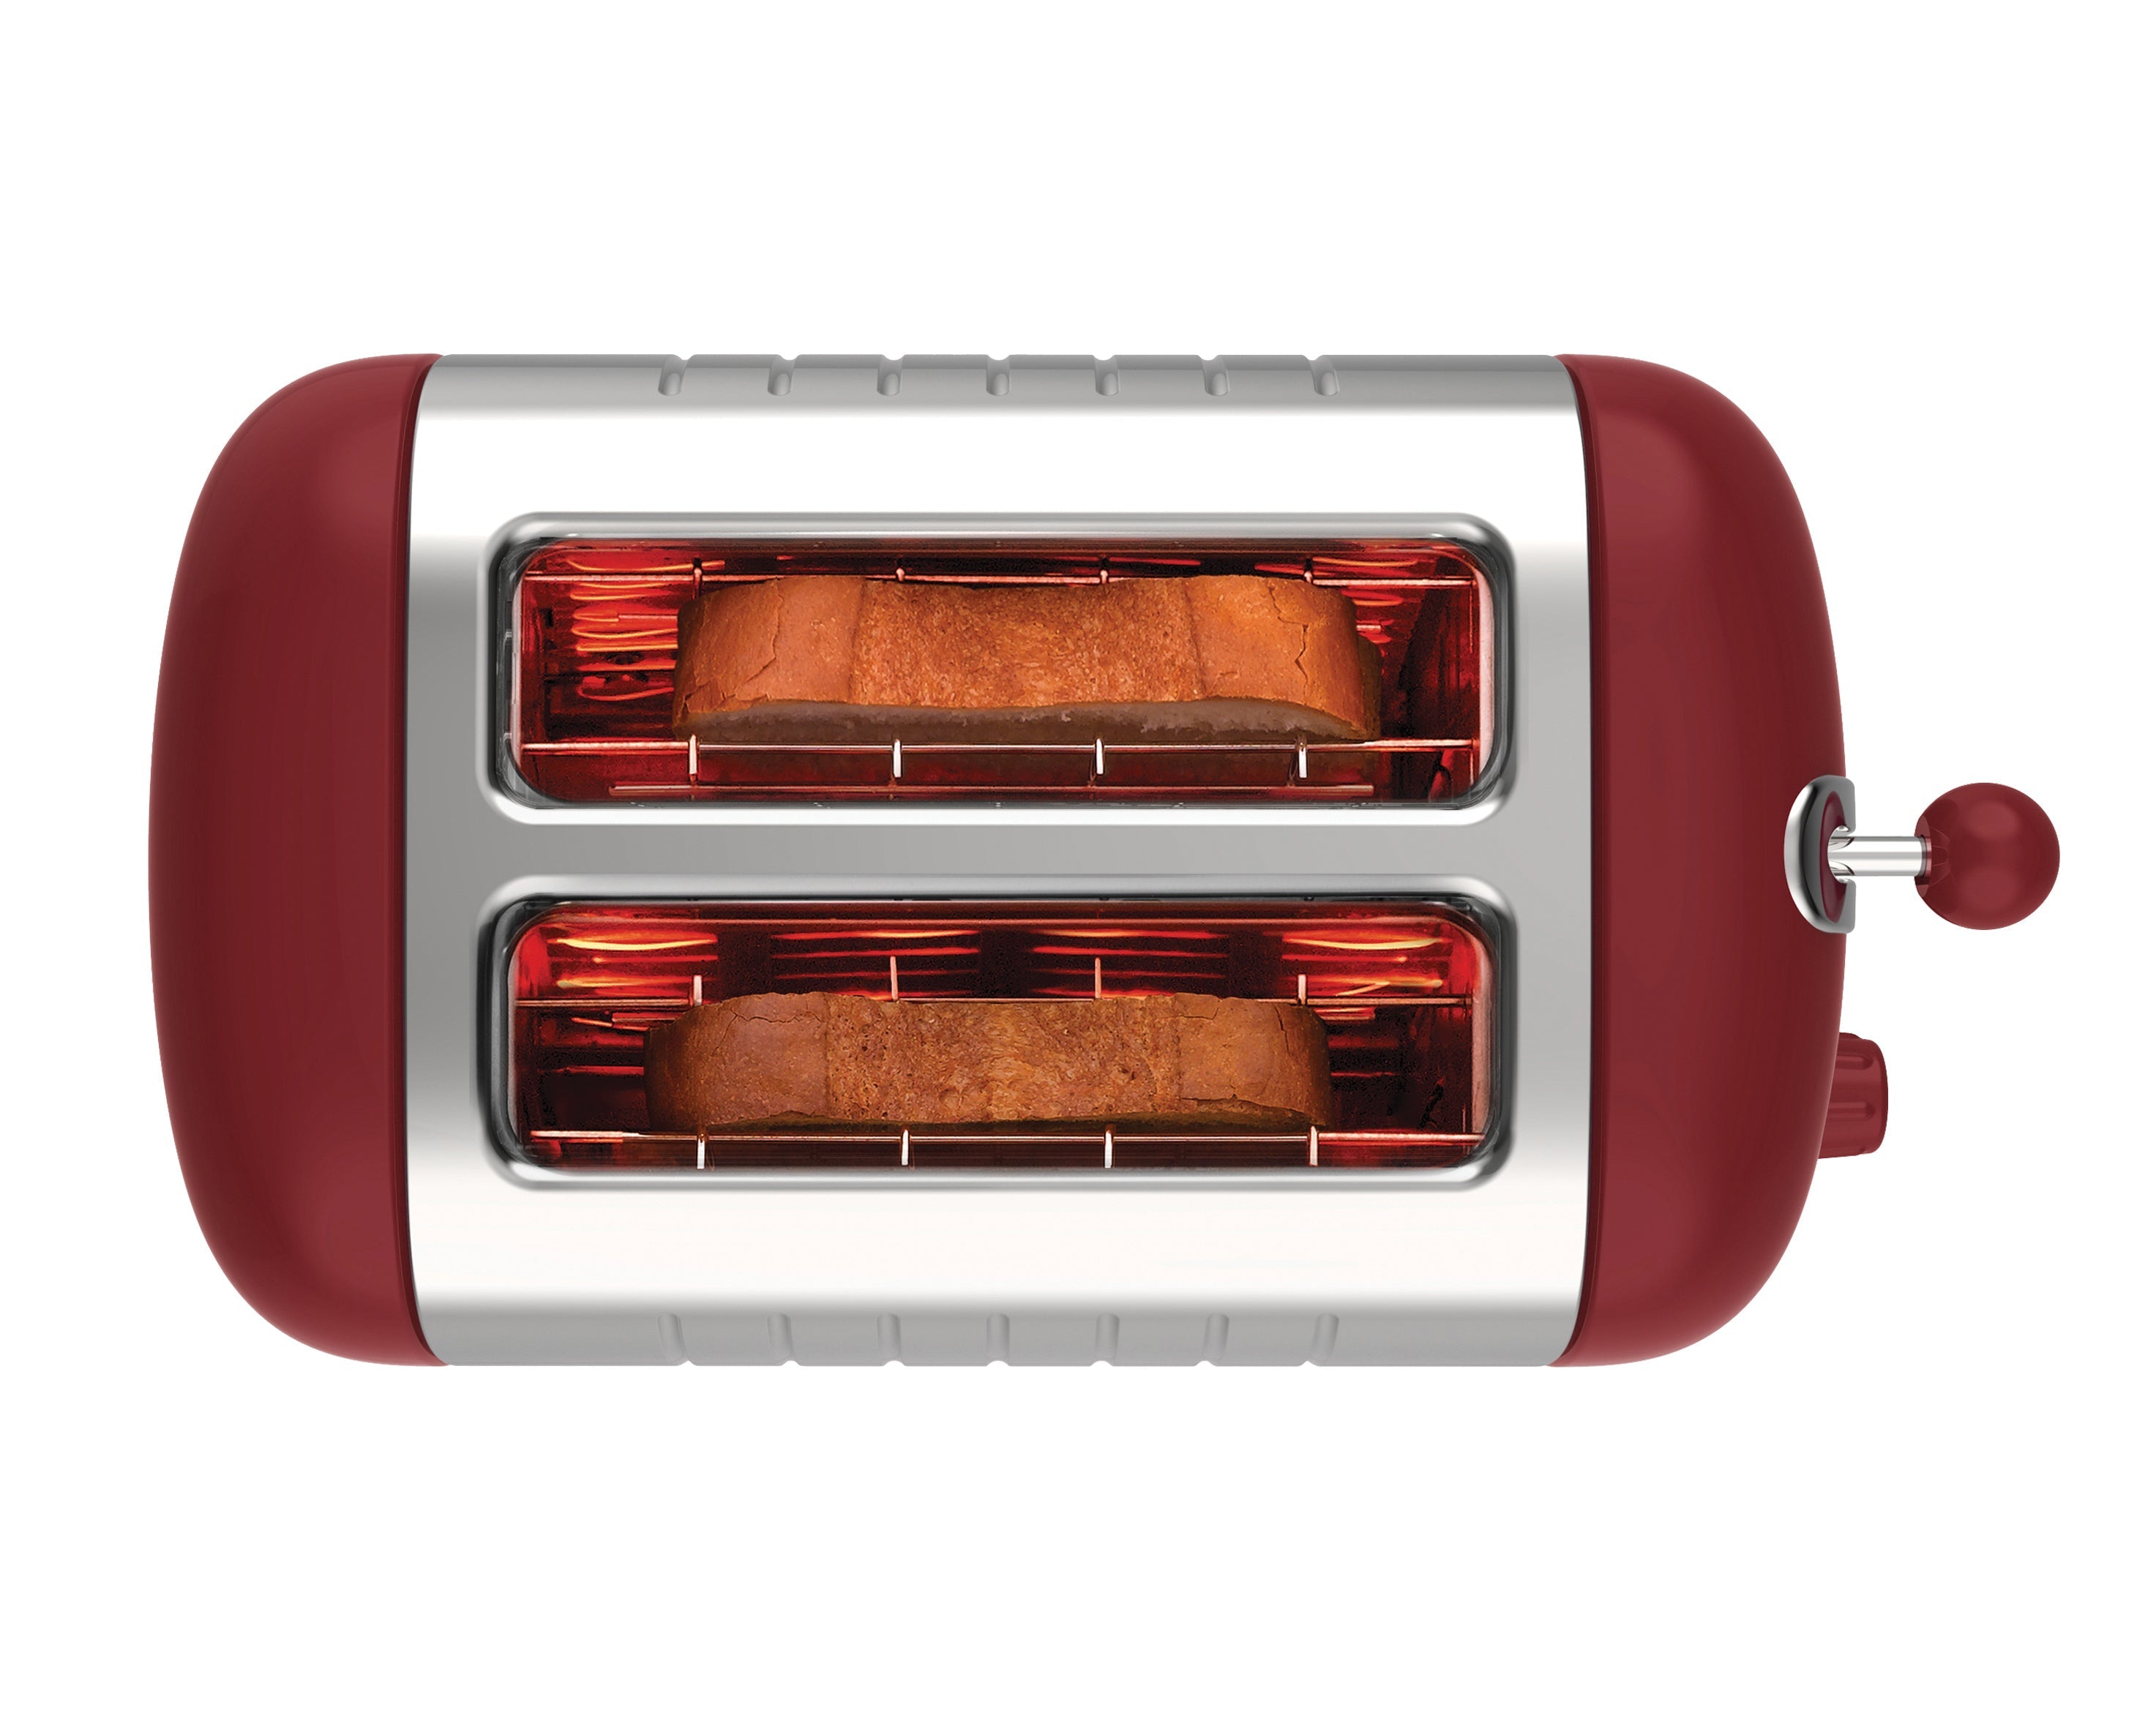 Dualit Lite Toaster 2 Slot, Red